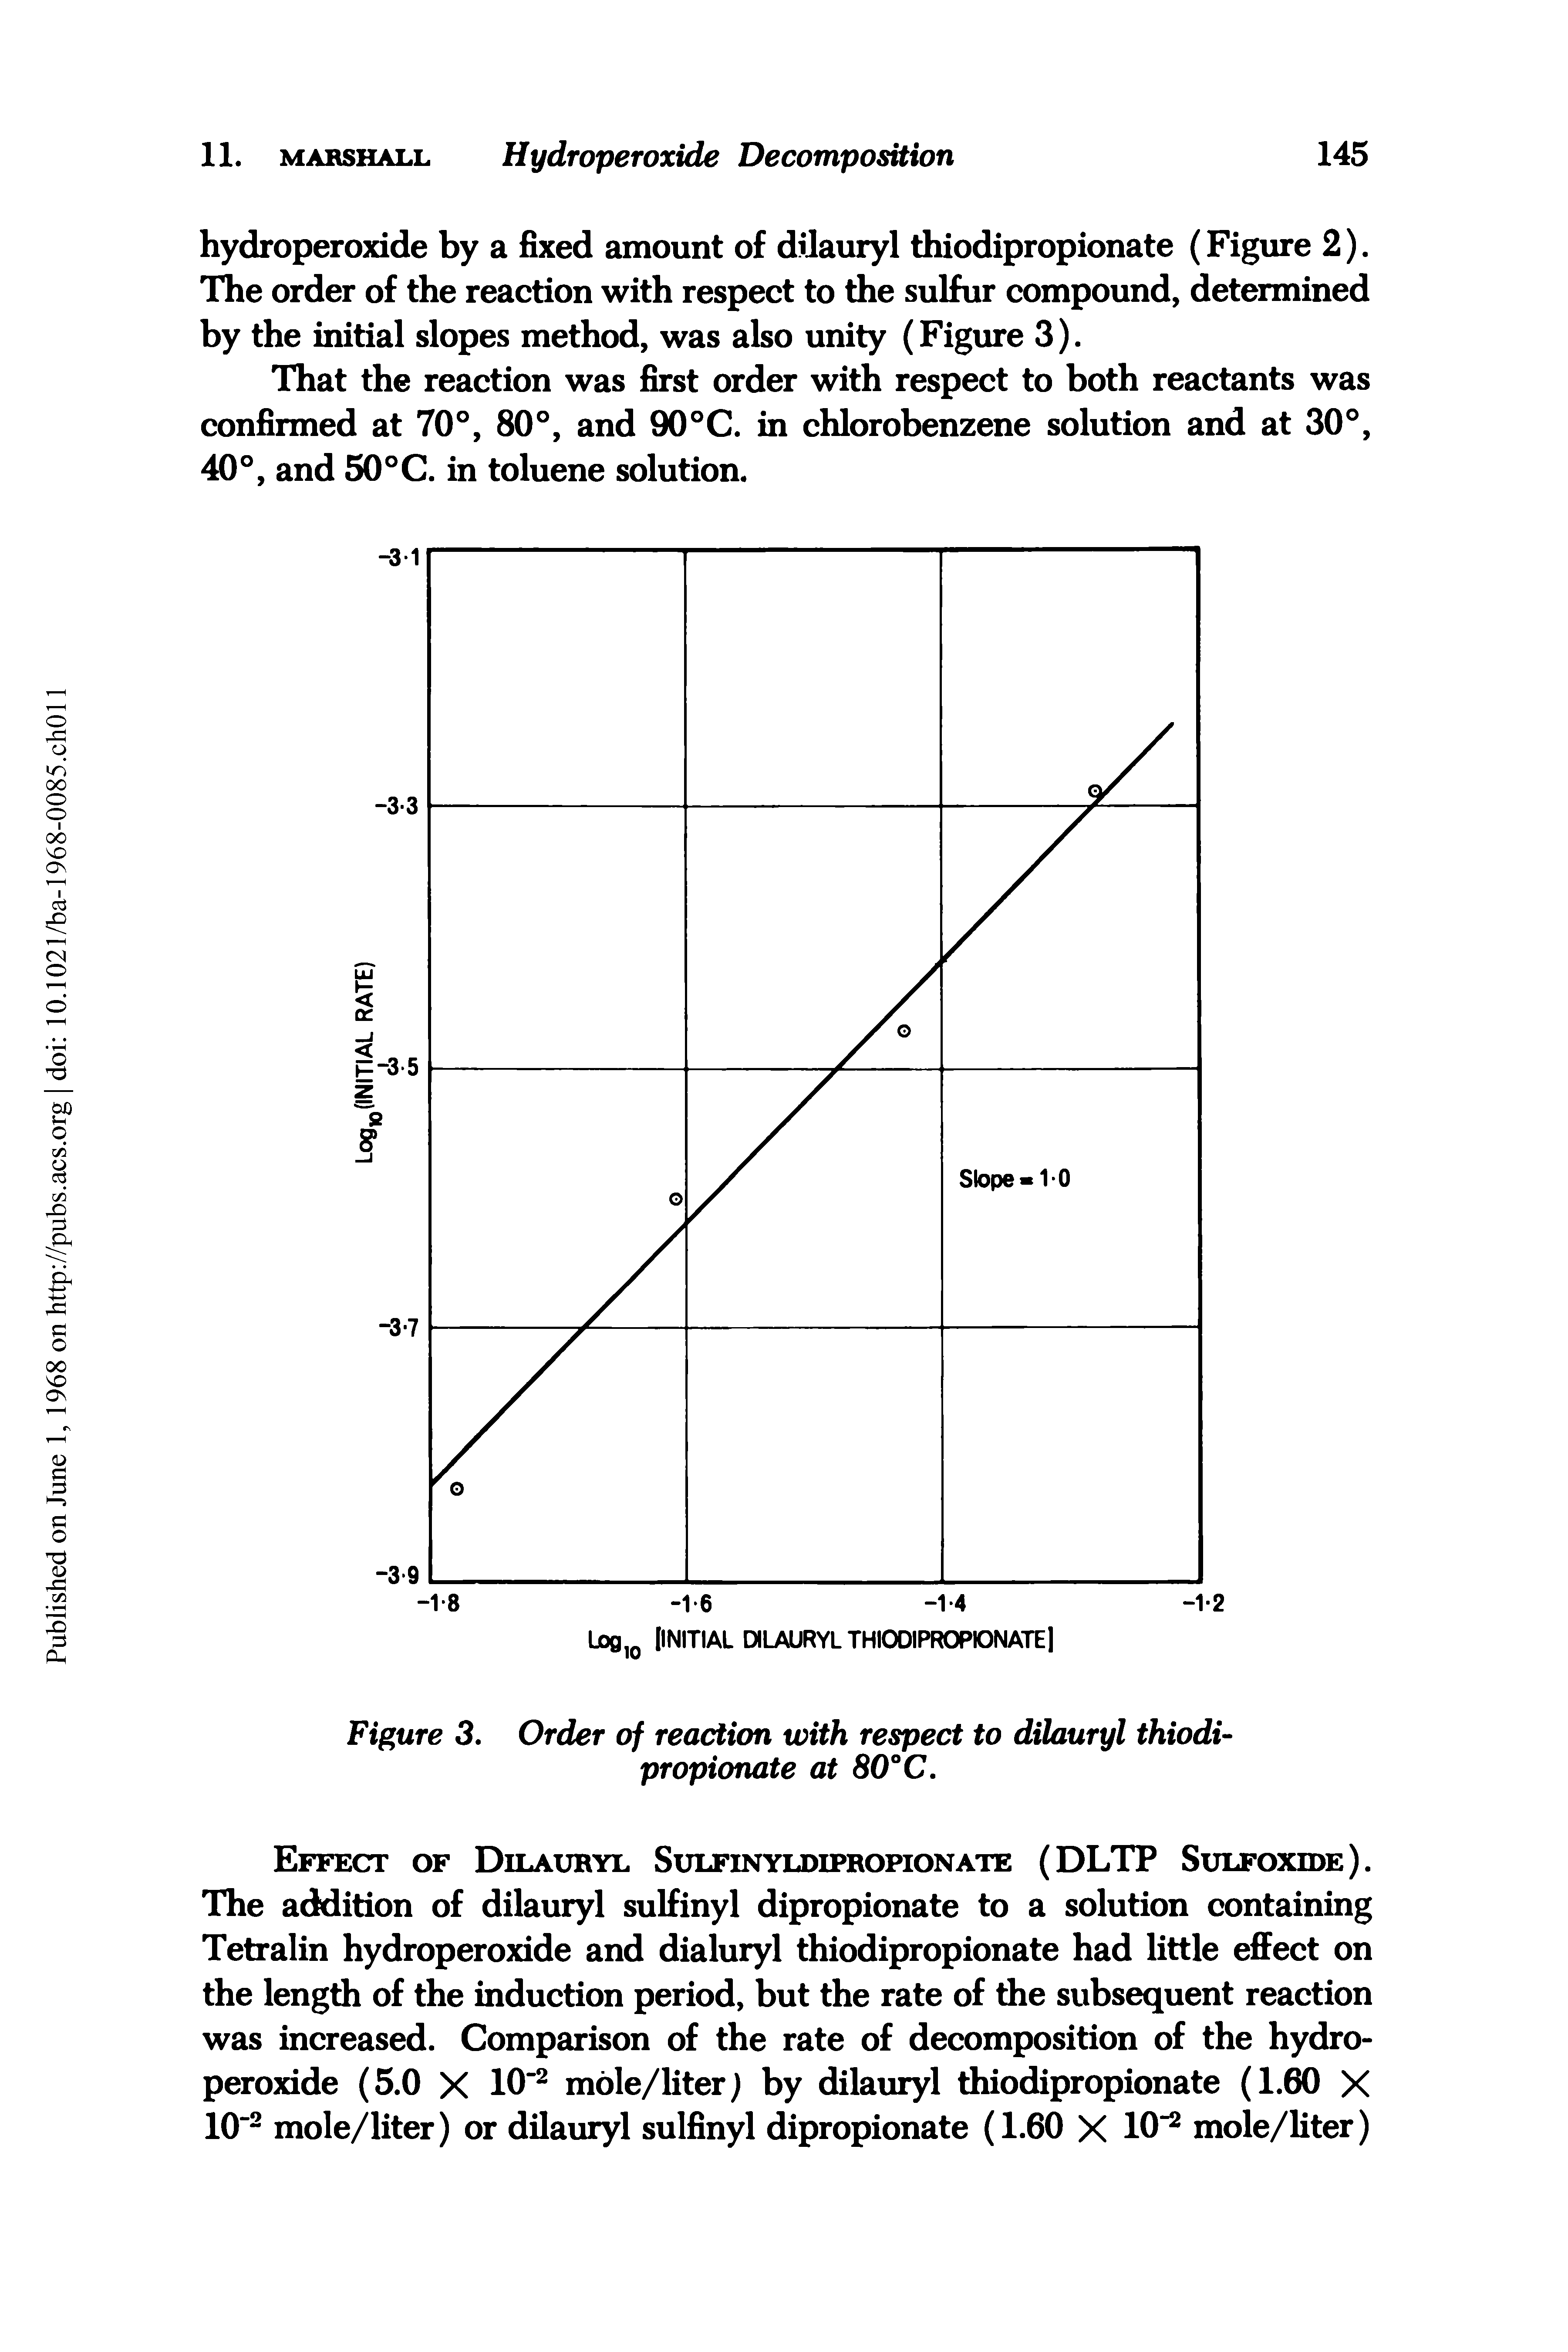 Figure 3. Order of reaction with respect to dilauryl thiodipropionate at 80° C.